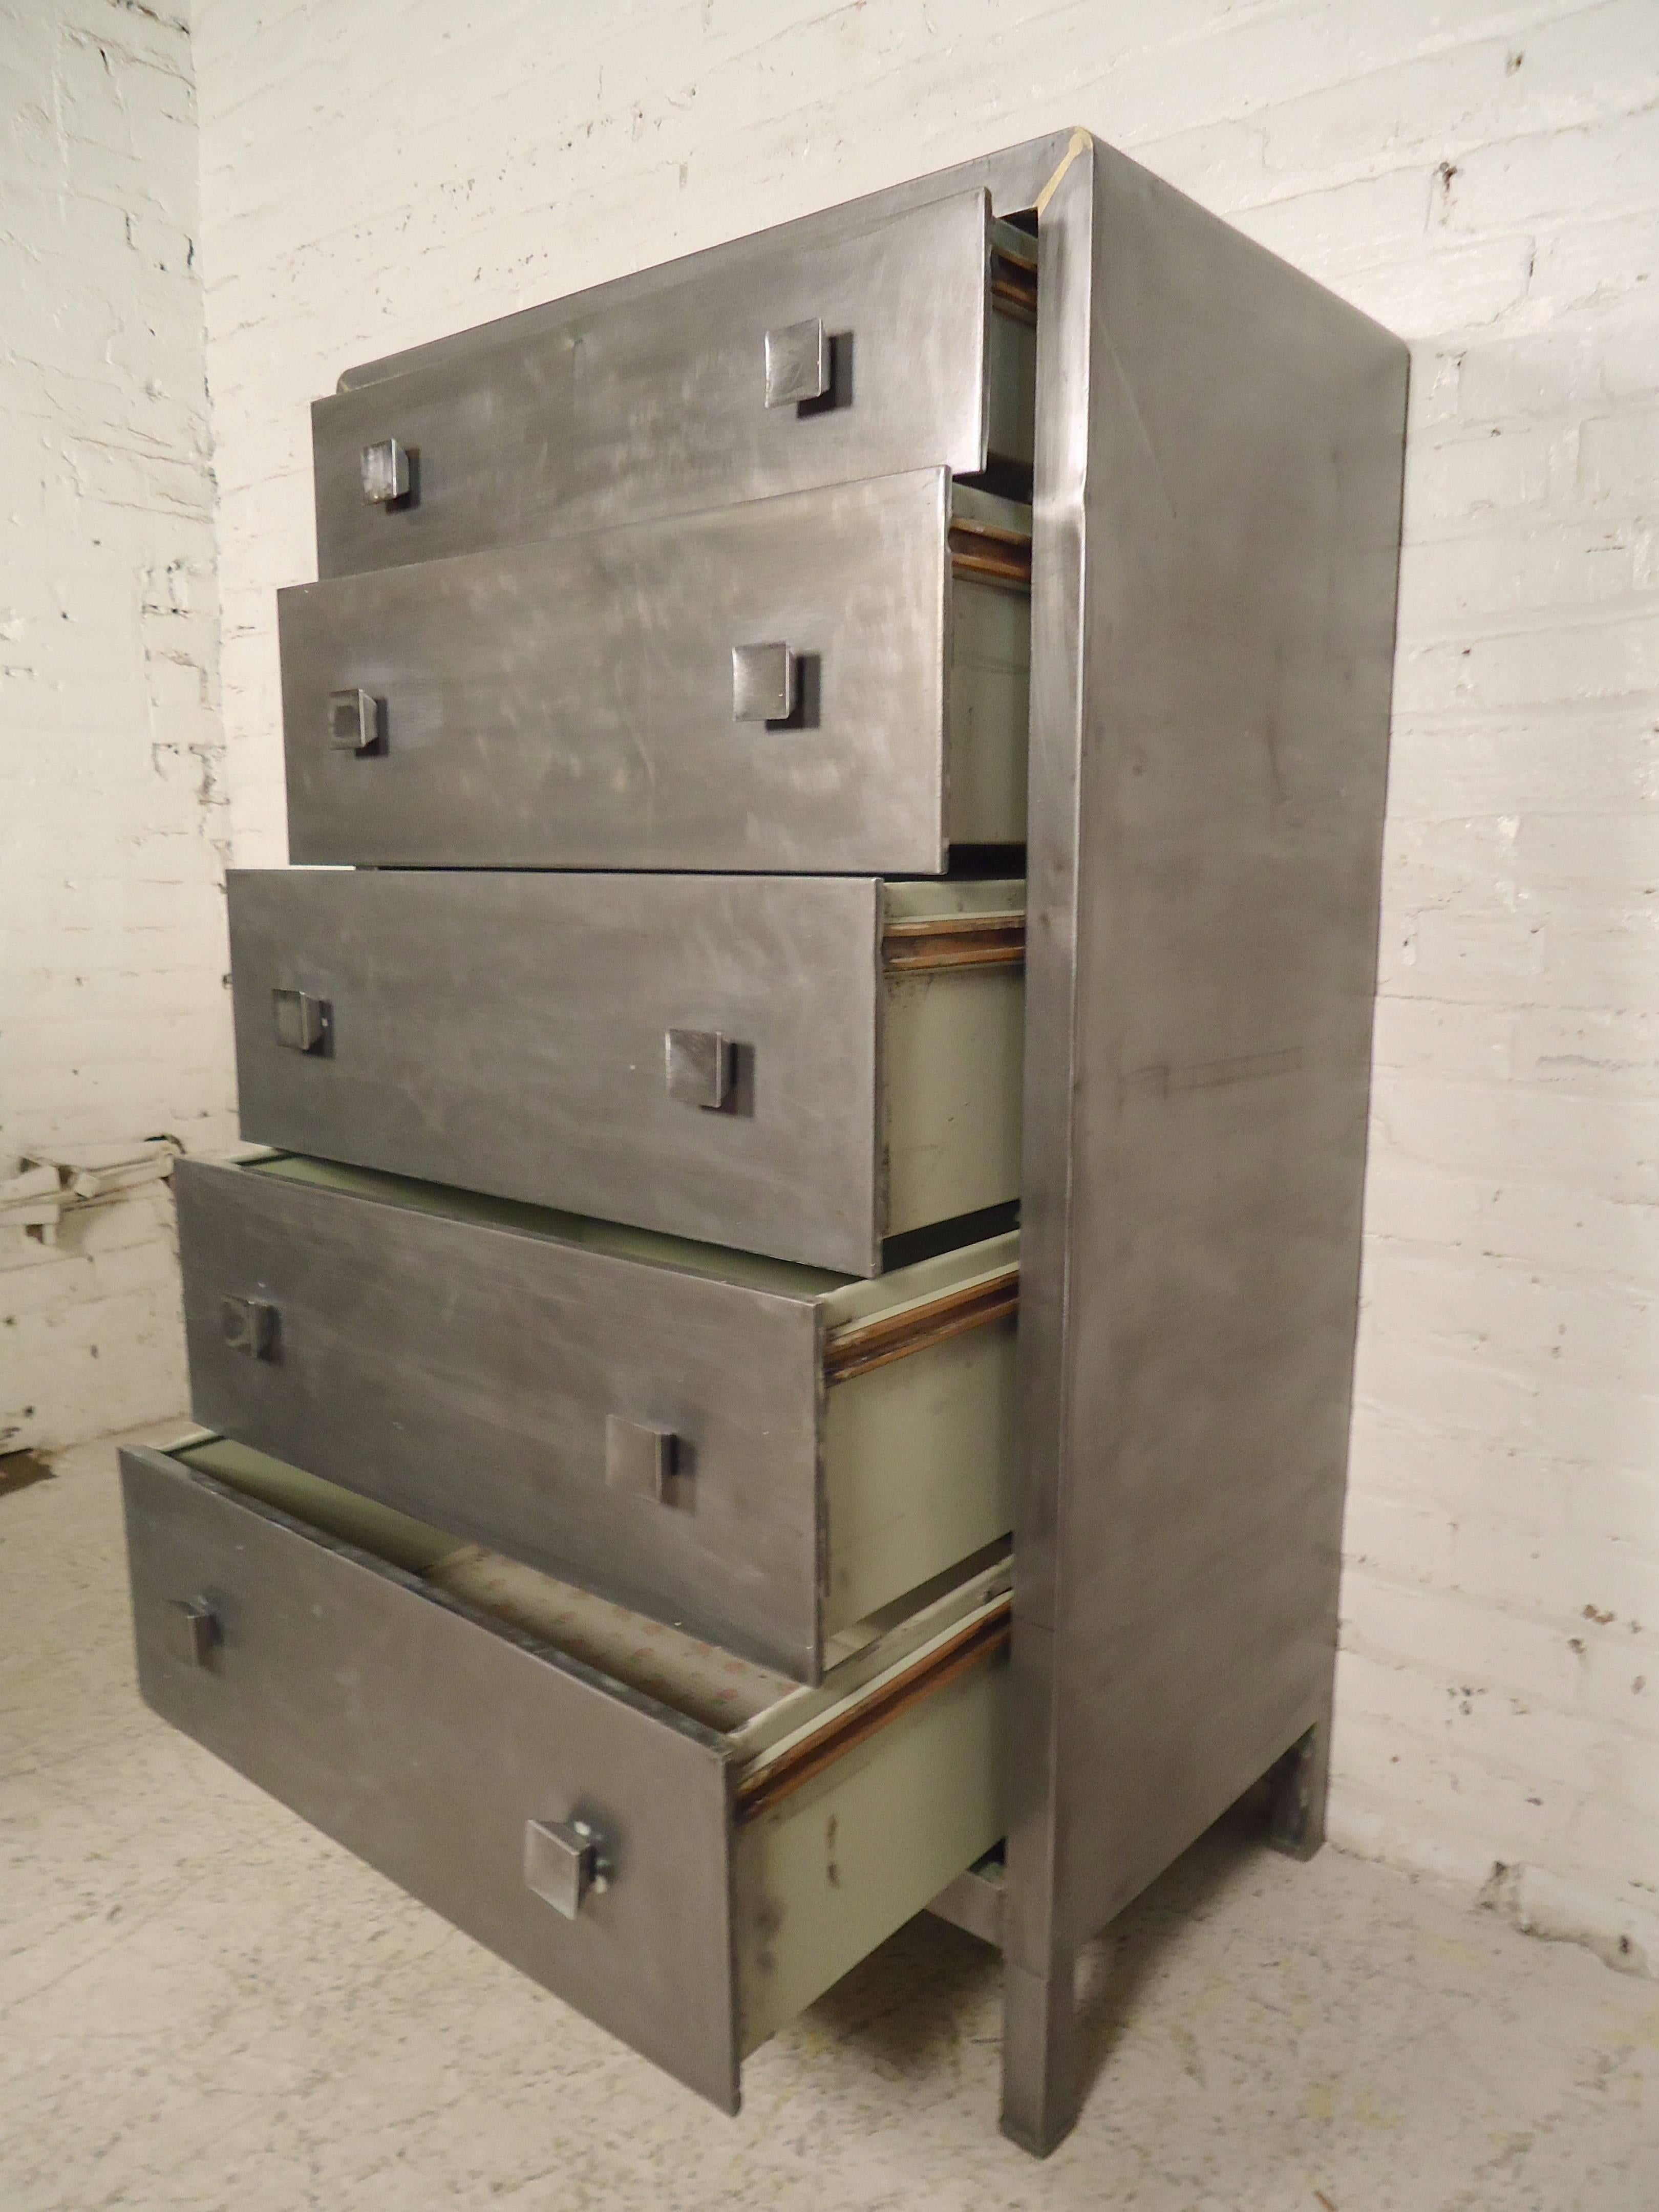 Norman Bel Geddes designed dresser, restored in a handsome Industrial finish. Five wide drawers with square handles, curved top edges, solid metal construction.
Matching small dresser available.

(Please confirm item location - NY or NJ - with